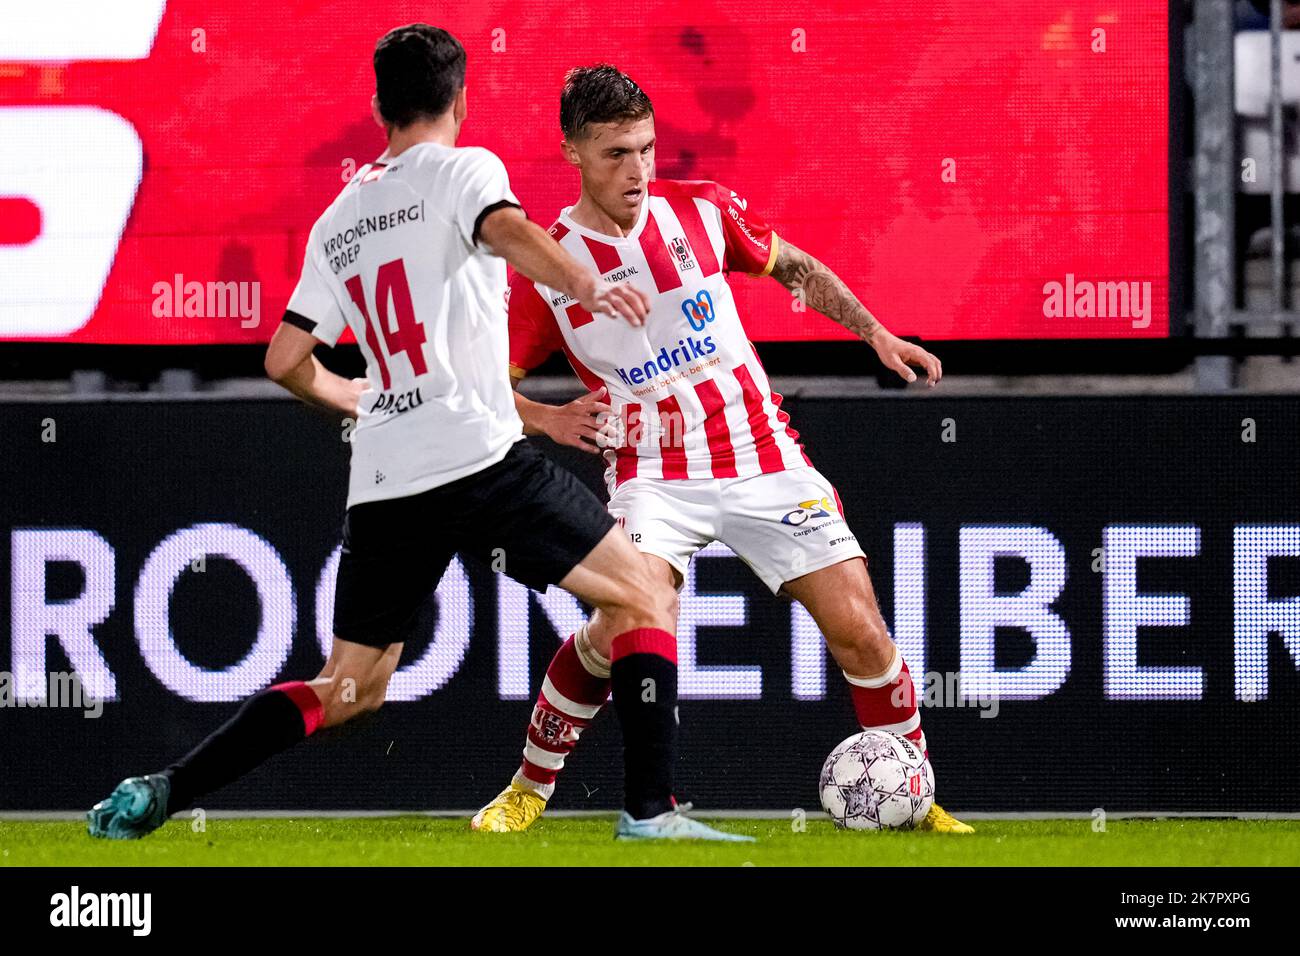 ALMERE, NETHERLANDS - OCTOBER 18: Jose Pascual of Almere City FC, Dean van der Sluys of TOP Oss during the Dutch TOTO KNVB Cup match between Almere City FC and TOP Oss at Yanmar Stadion on October 18, 2022 in Almere, Netherlands (Photo by Patrick Goosen/Orange Pictures) Stock Photo